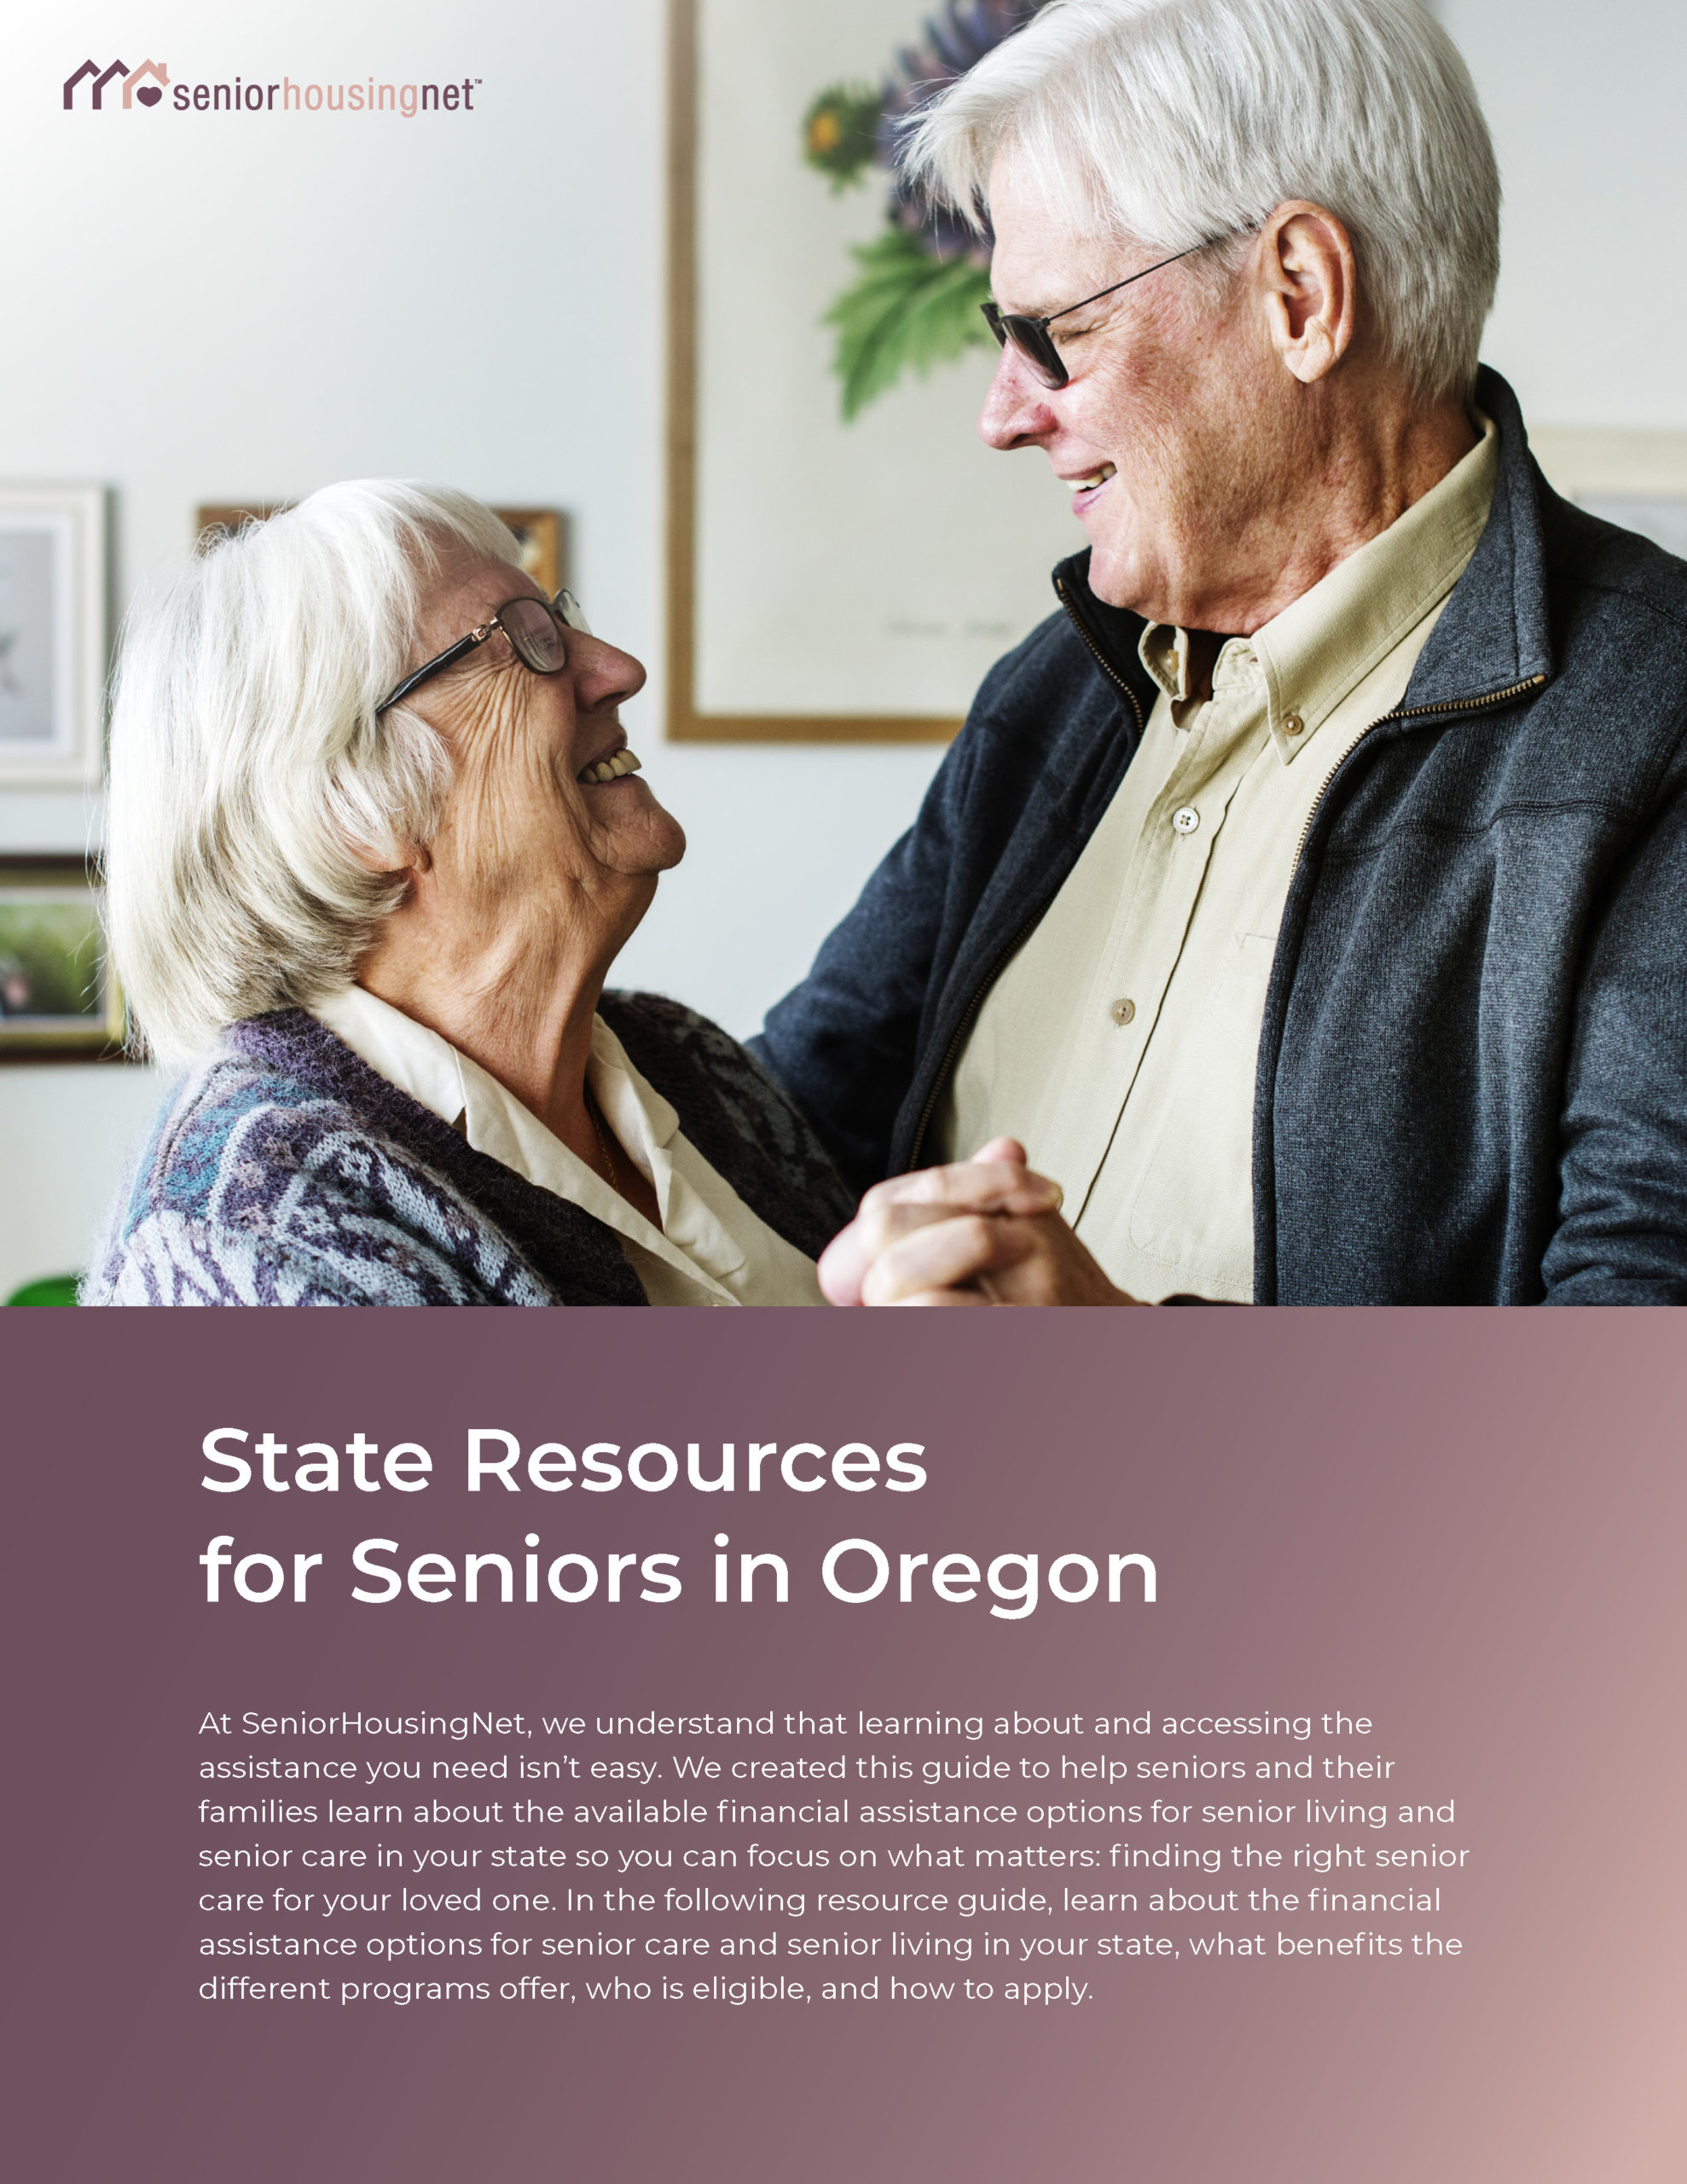 State Resources for Seniors in Oregon